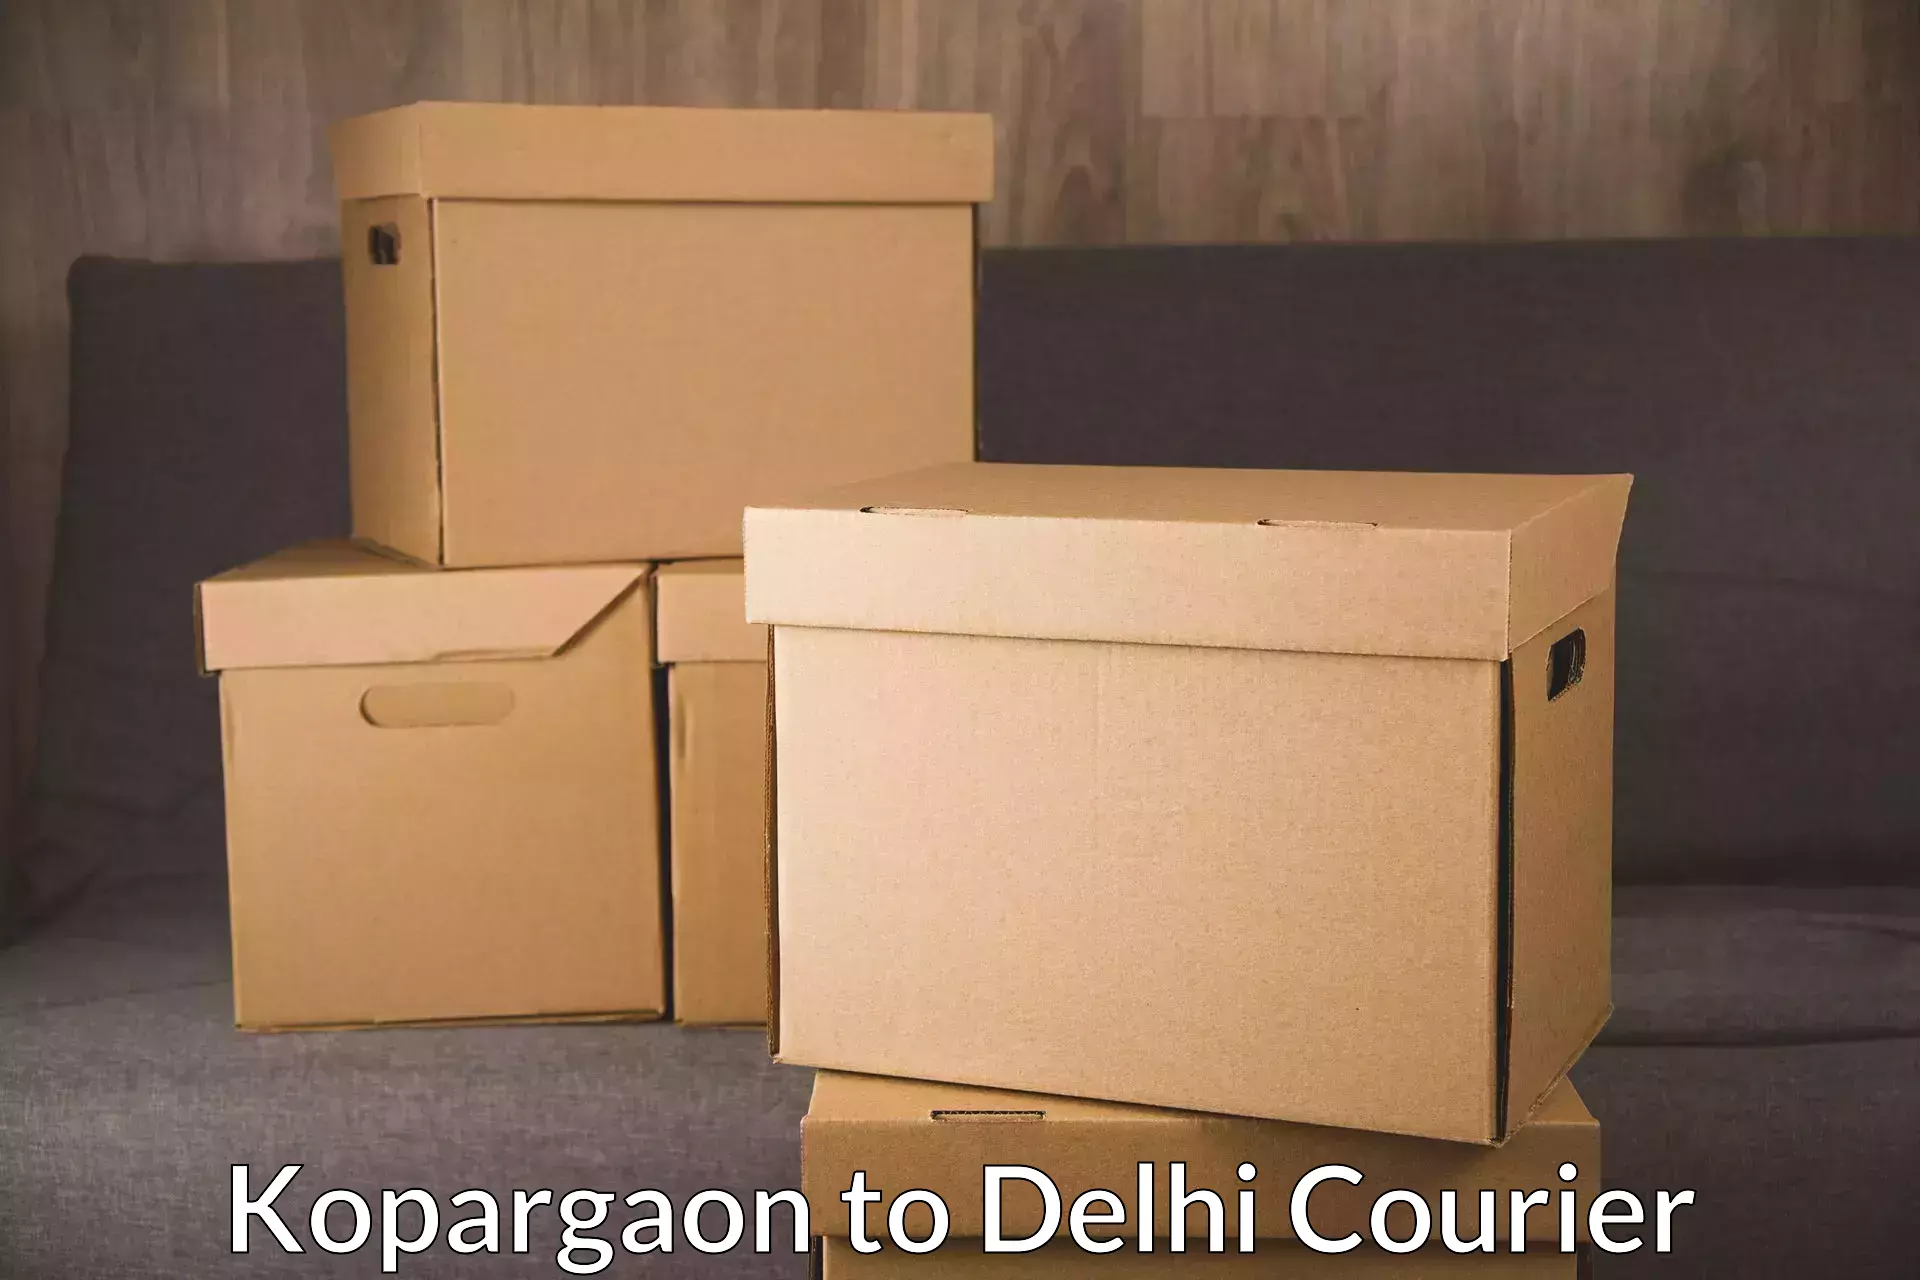 24-hour courier service Kopargaon to NCR